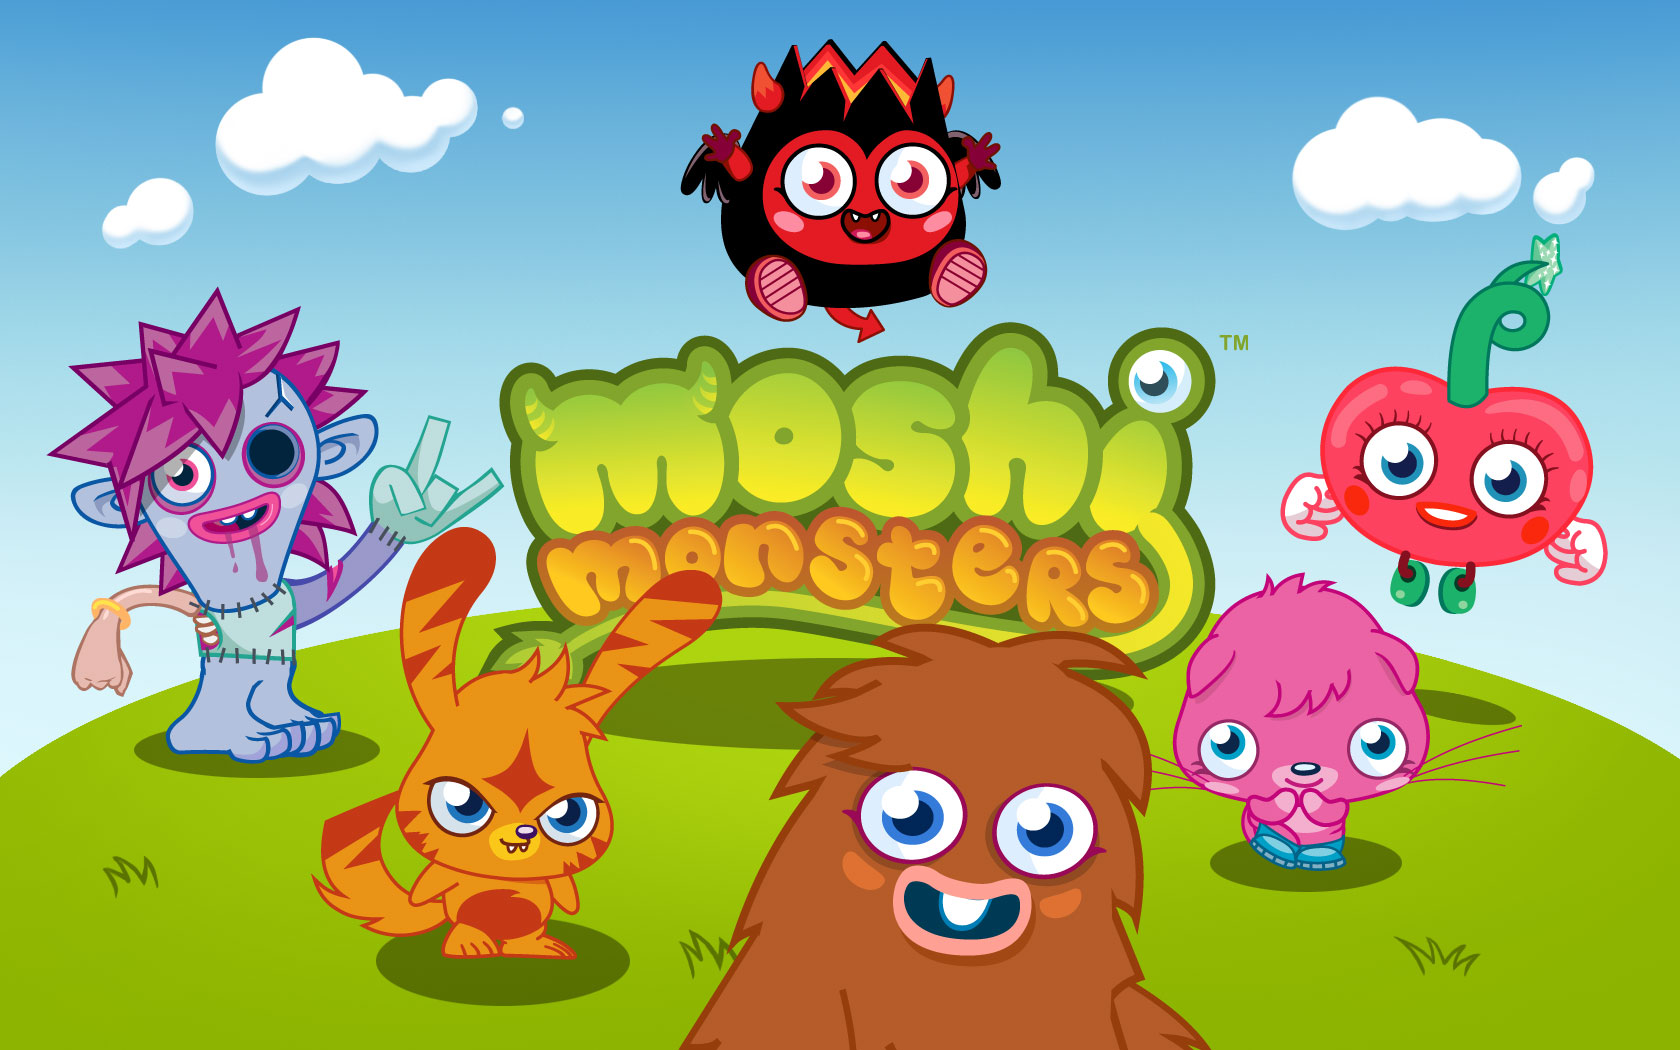  Moshi Monsters Desktop Wallpapers at little Monsters Games 1680x1050